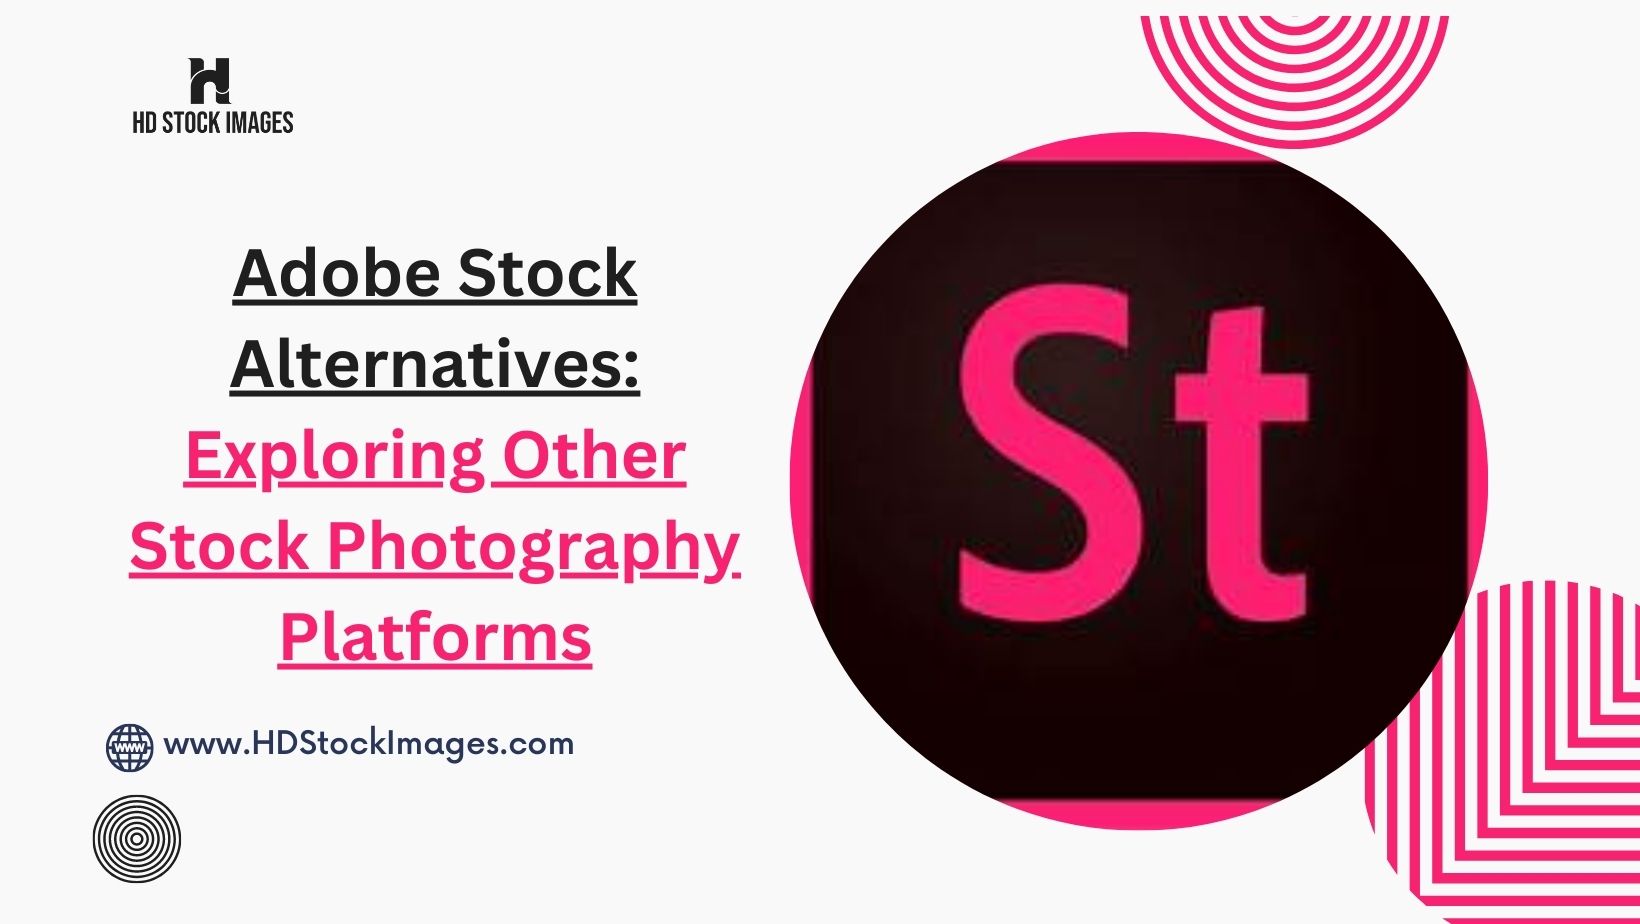 An image of Adobe Stock Alternatives: Exploring Other Stock Photography Platforms